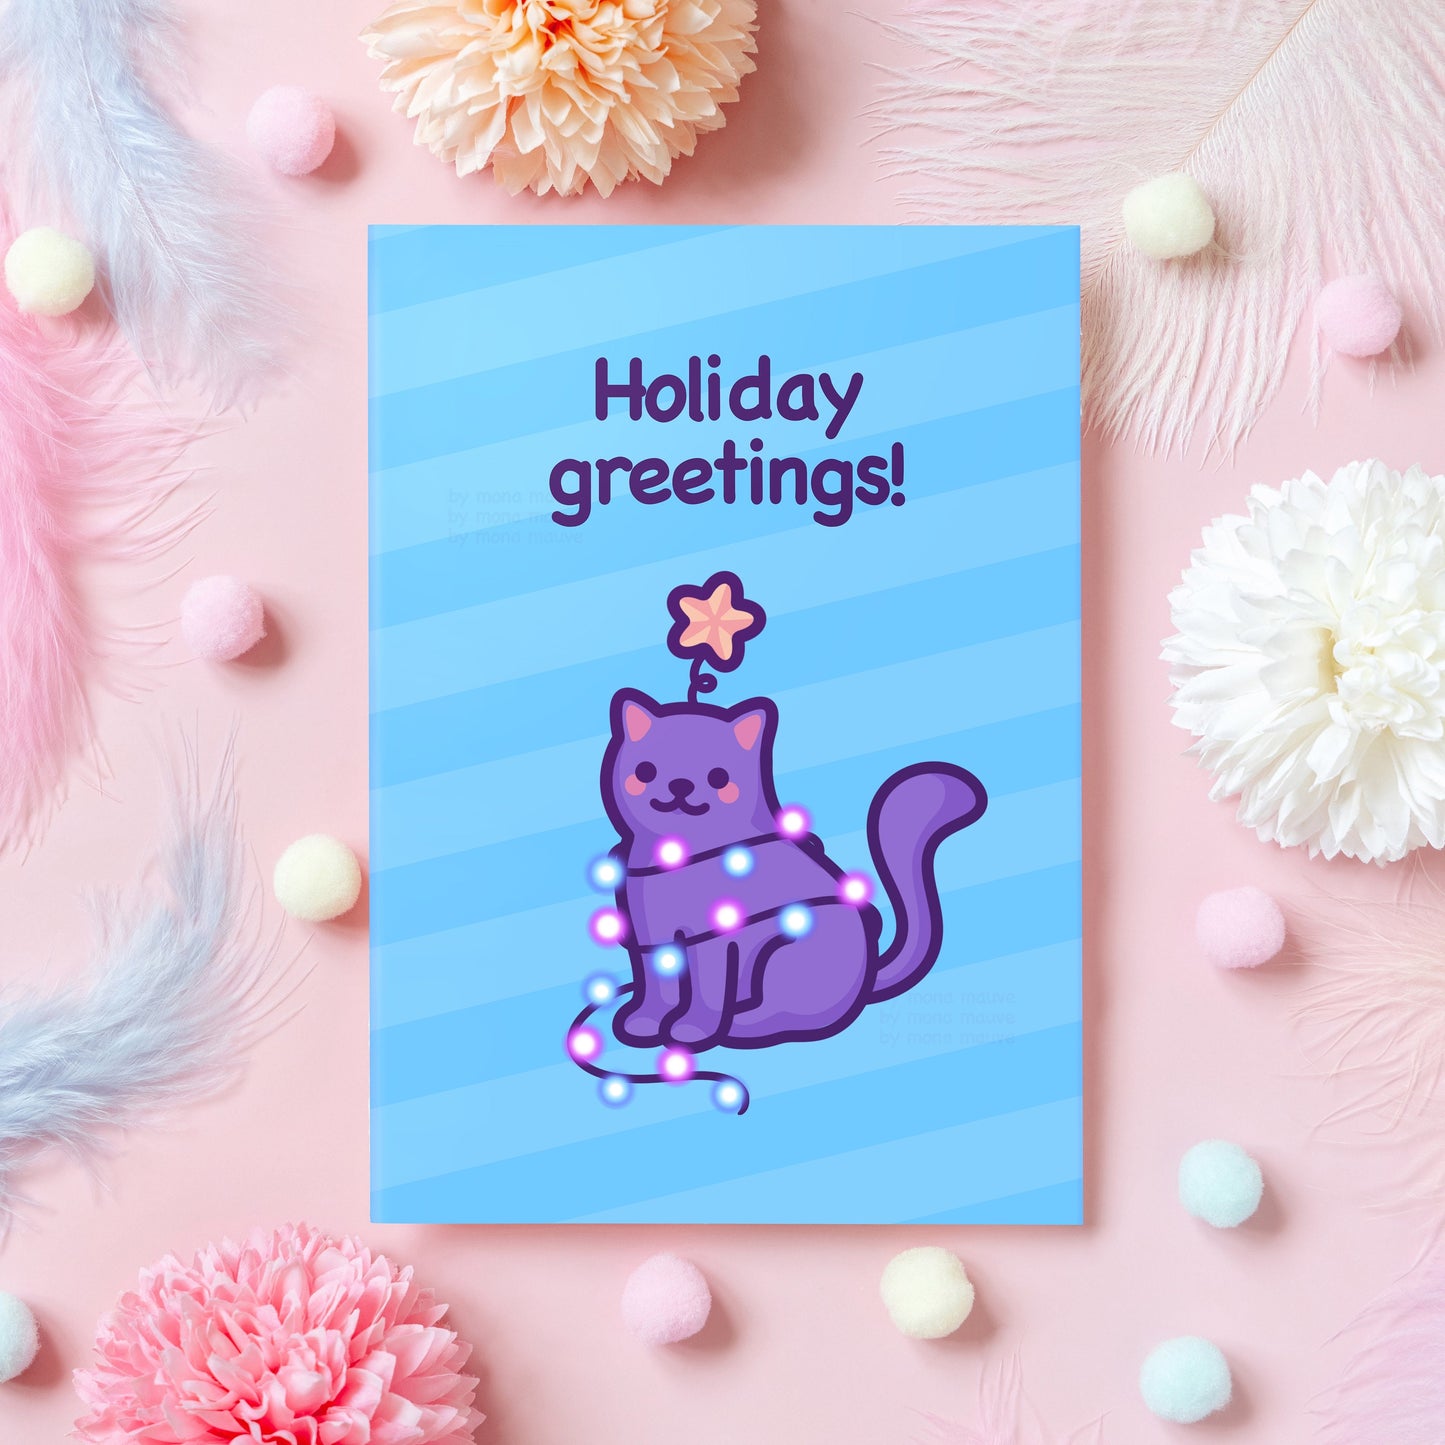 Wholesome & Cute Cat Christmas Card | Happy Holidays! | Wholesome Pet Christmas Gift for Boyfriend, Husband, Girlfriend, Wife, Mom, Sister - Her or Him